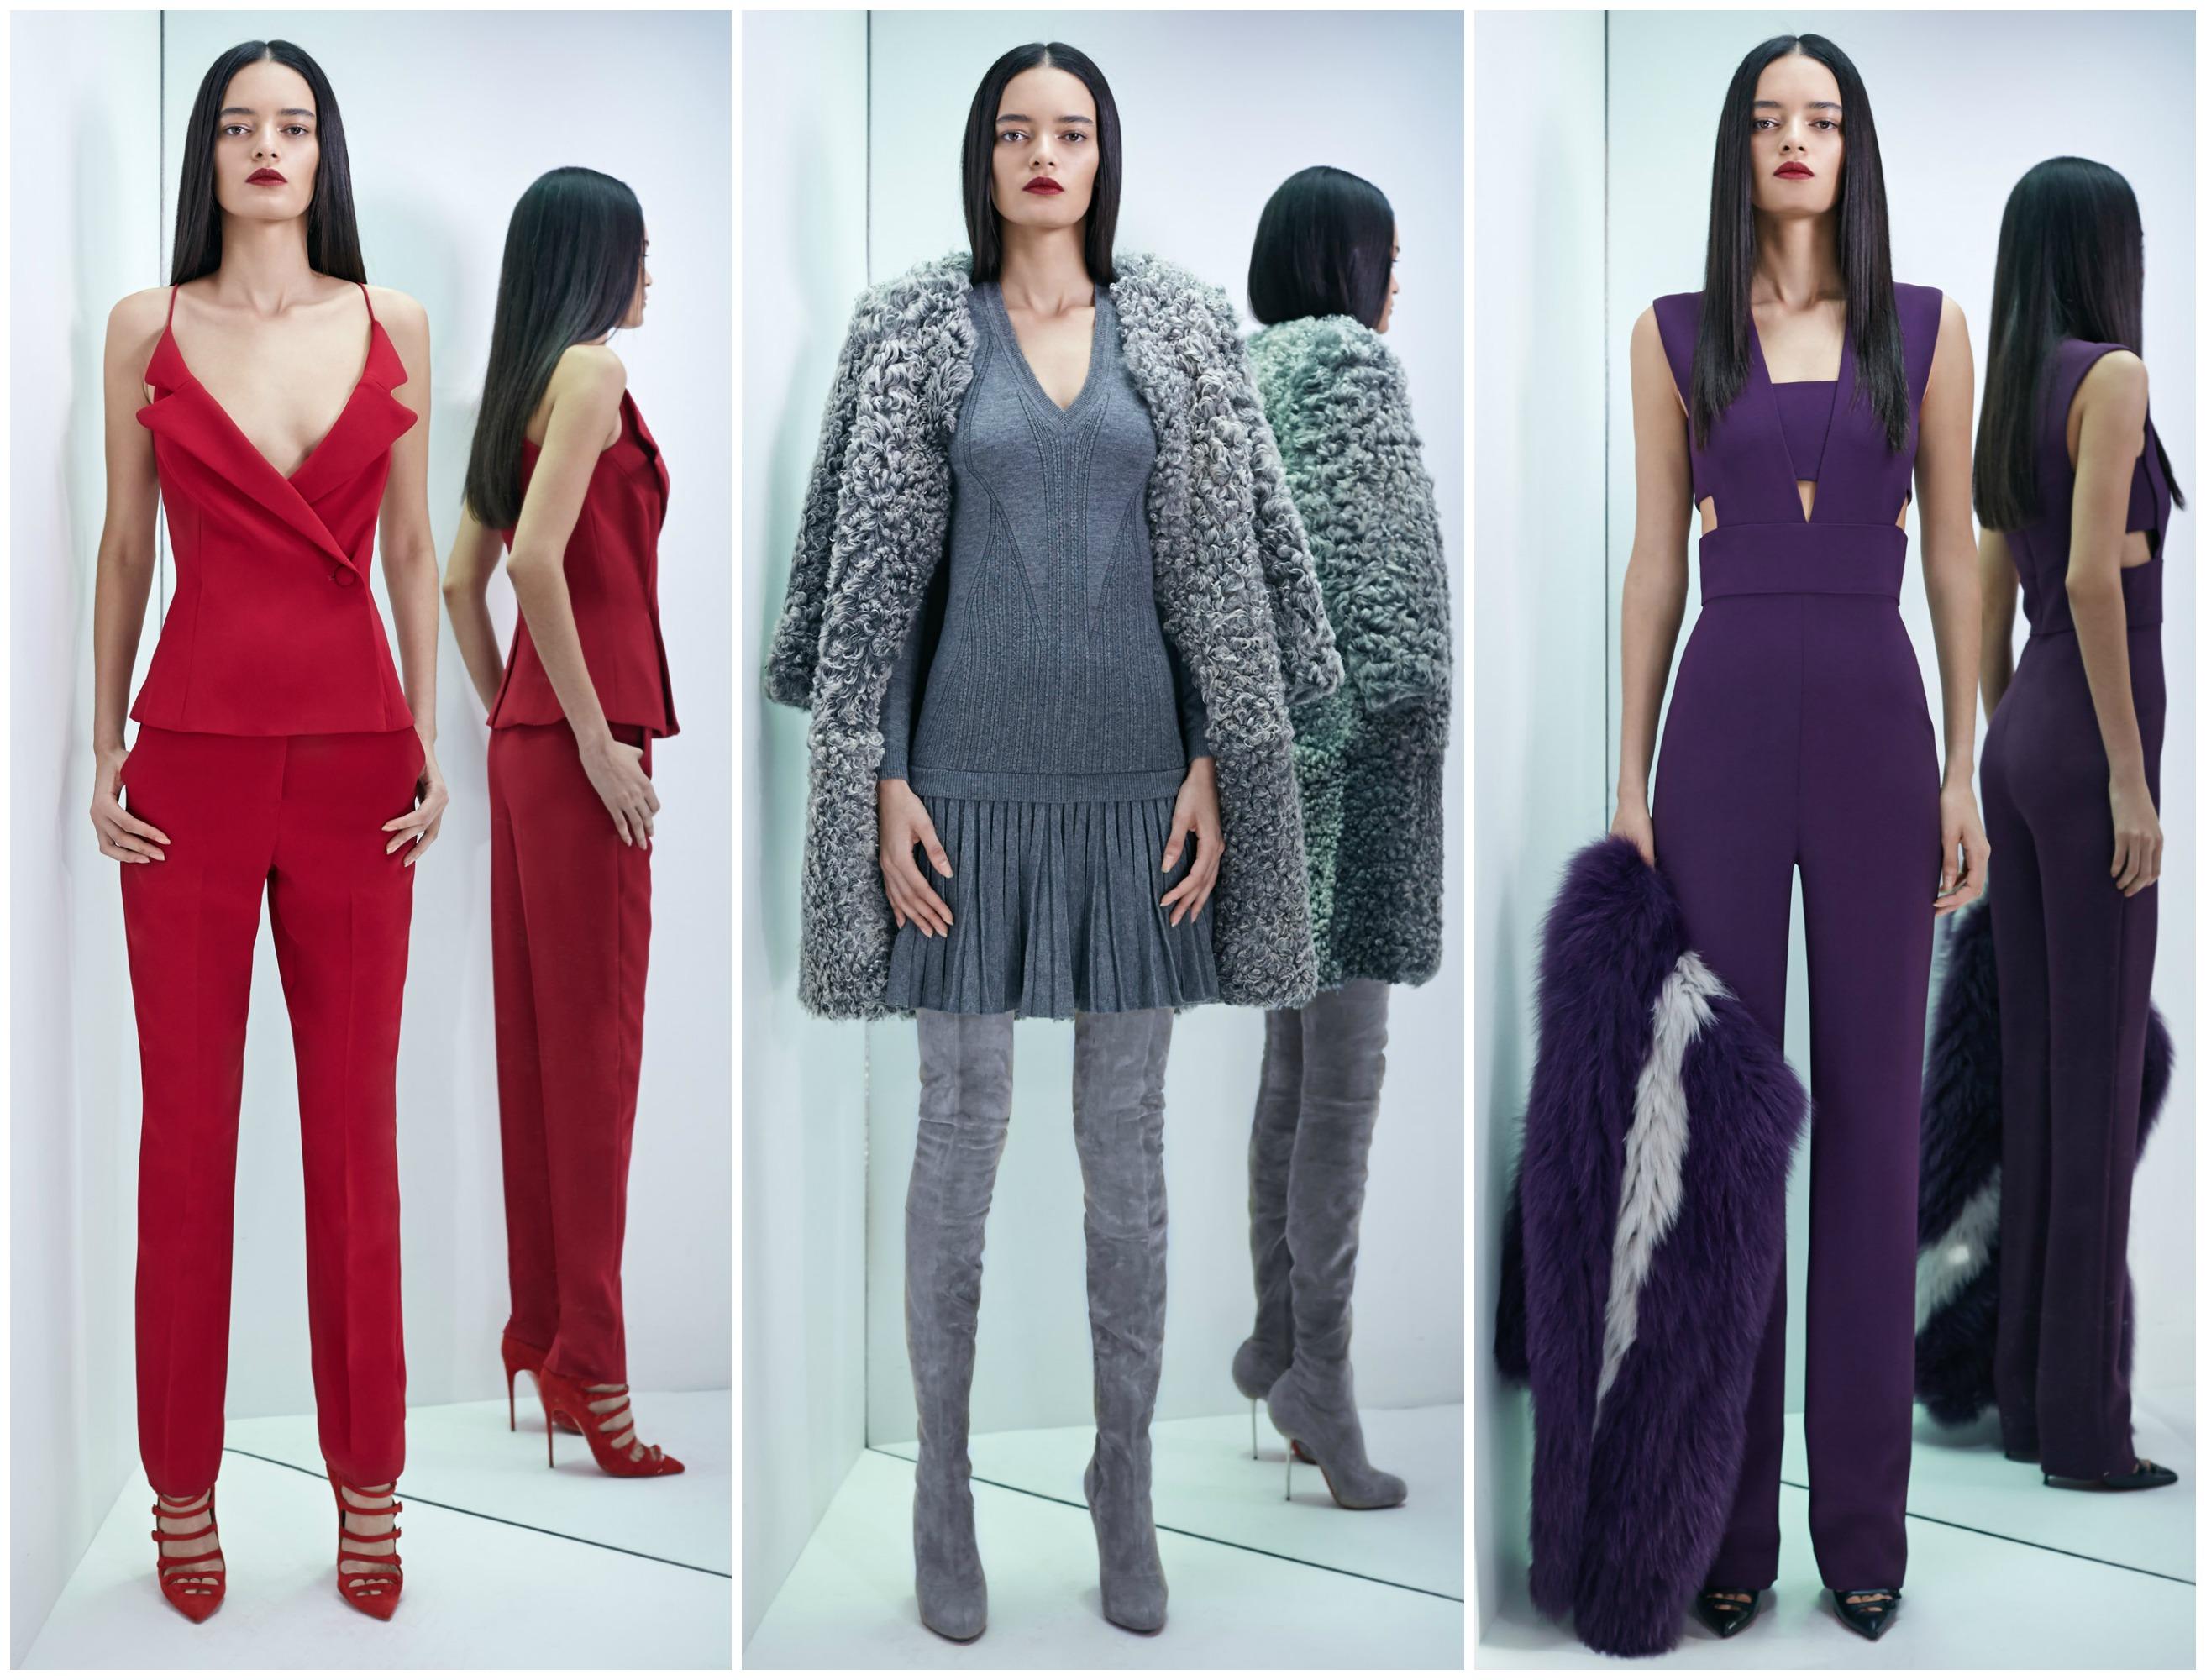 Cushnie et Ochs reimagined some classic shapes in on-trend jewel tones